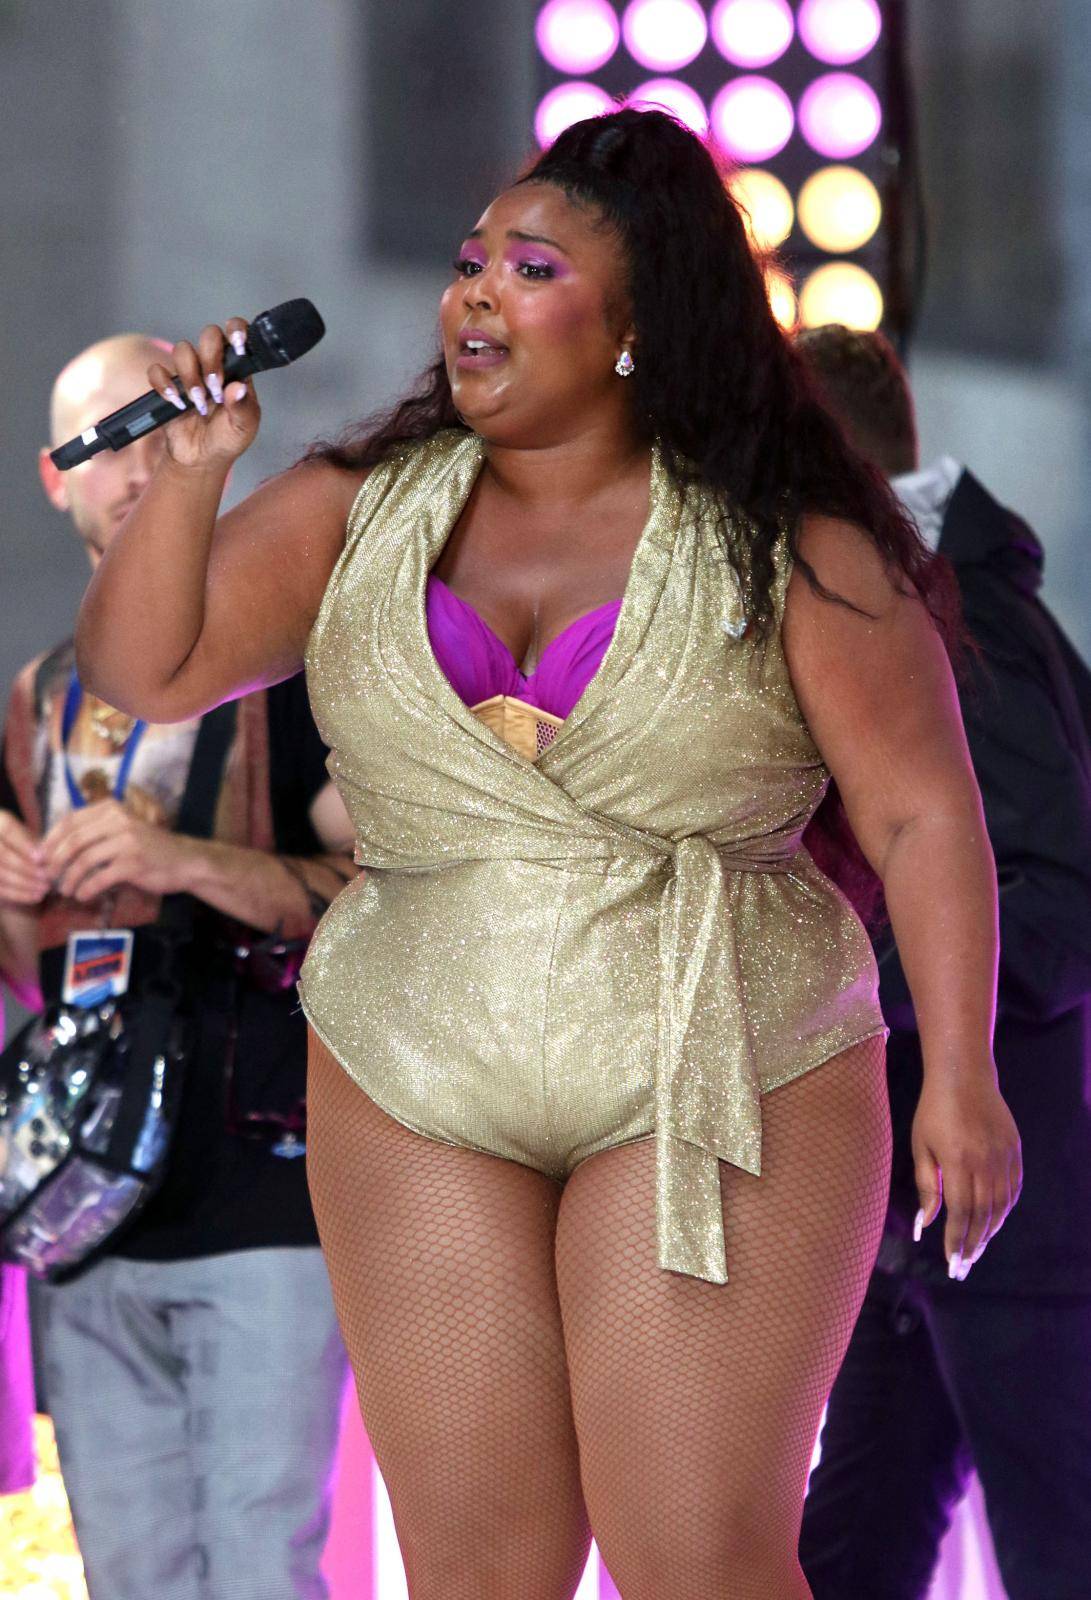 Lizzo in Concert - New York